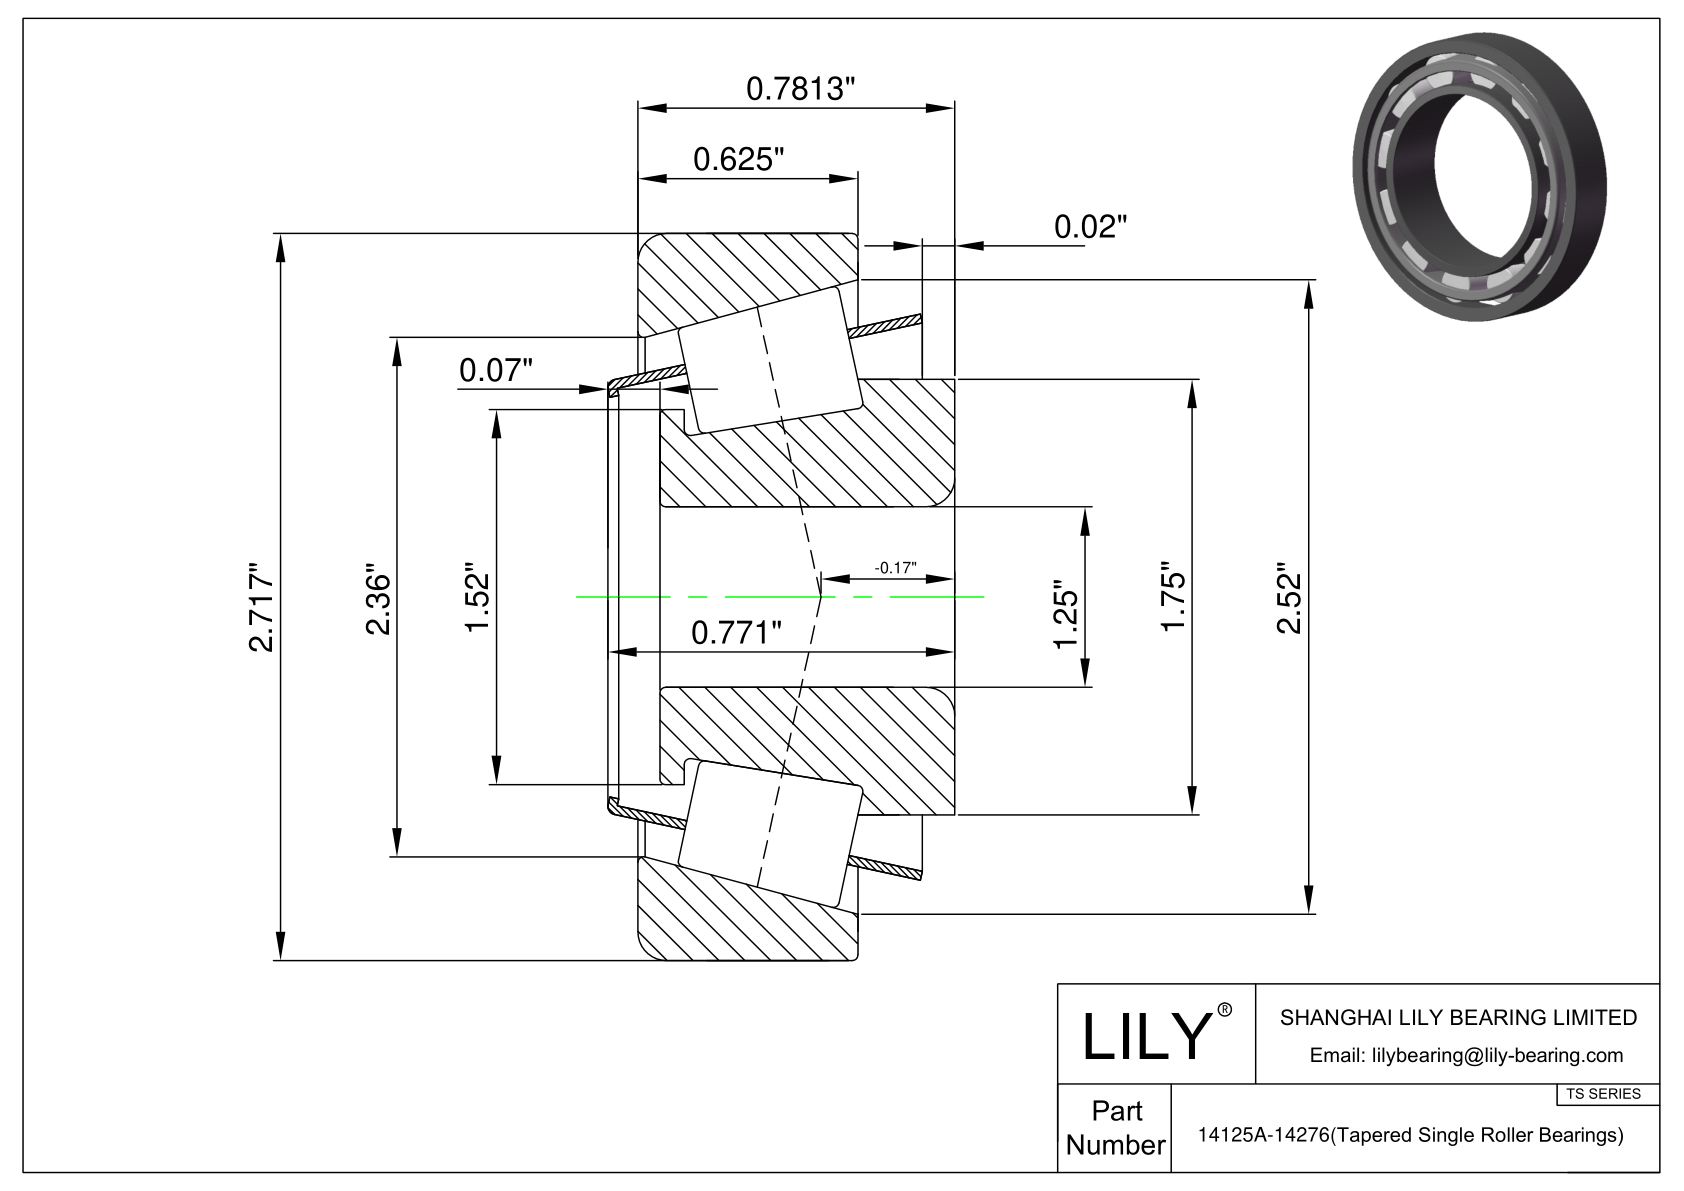 14125A-14276 TS (Tapered Single Roller Bearings) (Imperial) cad drawing